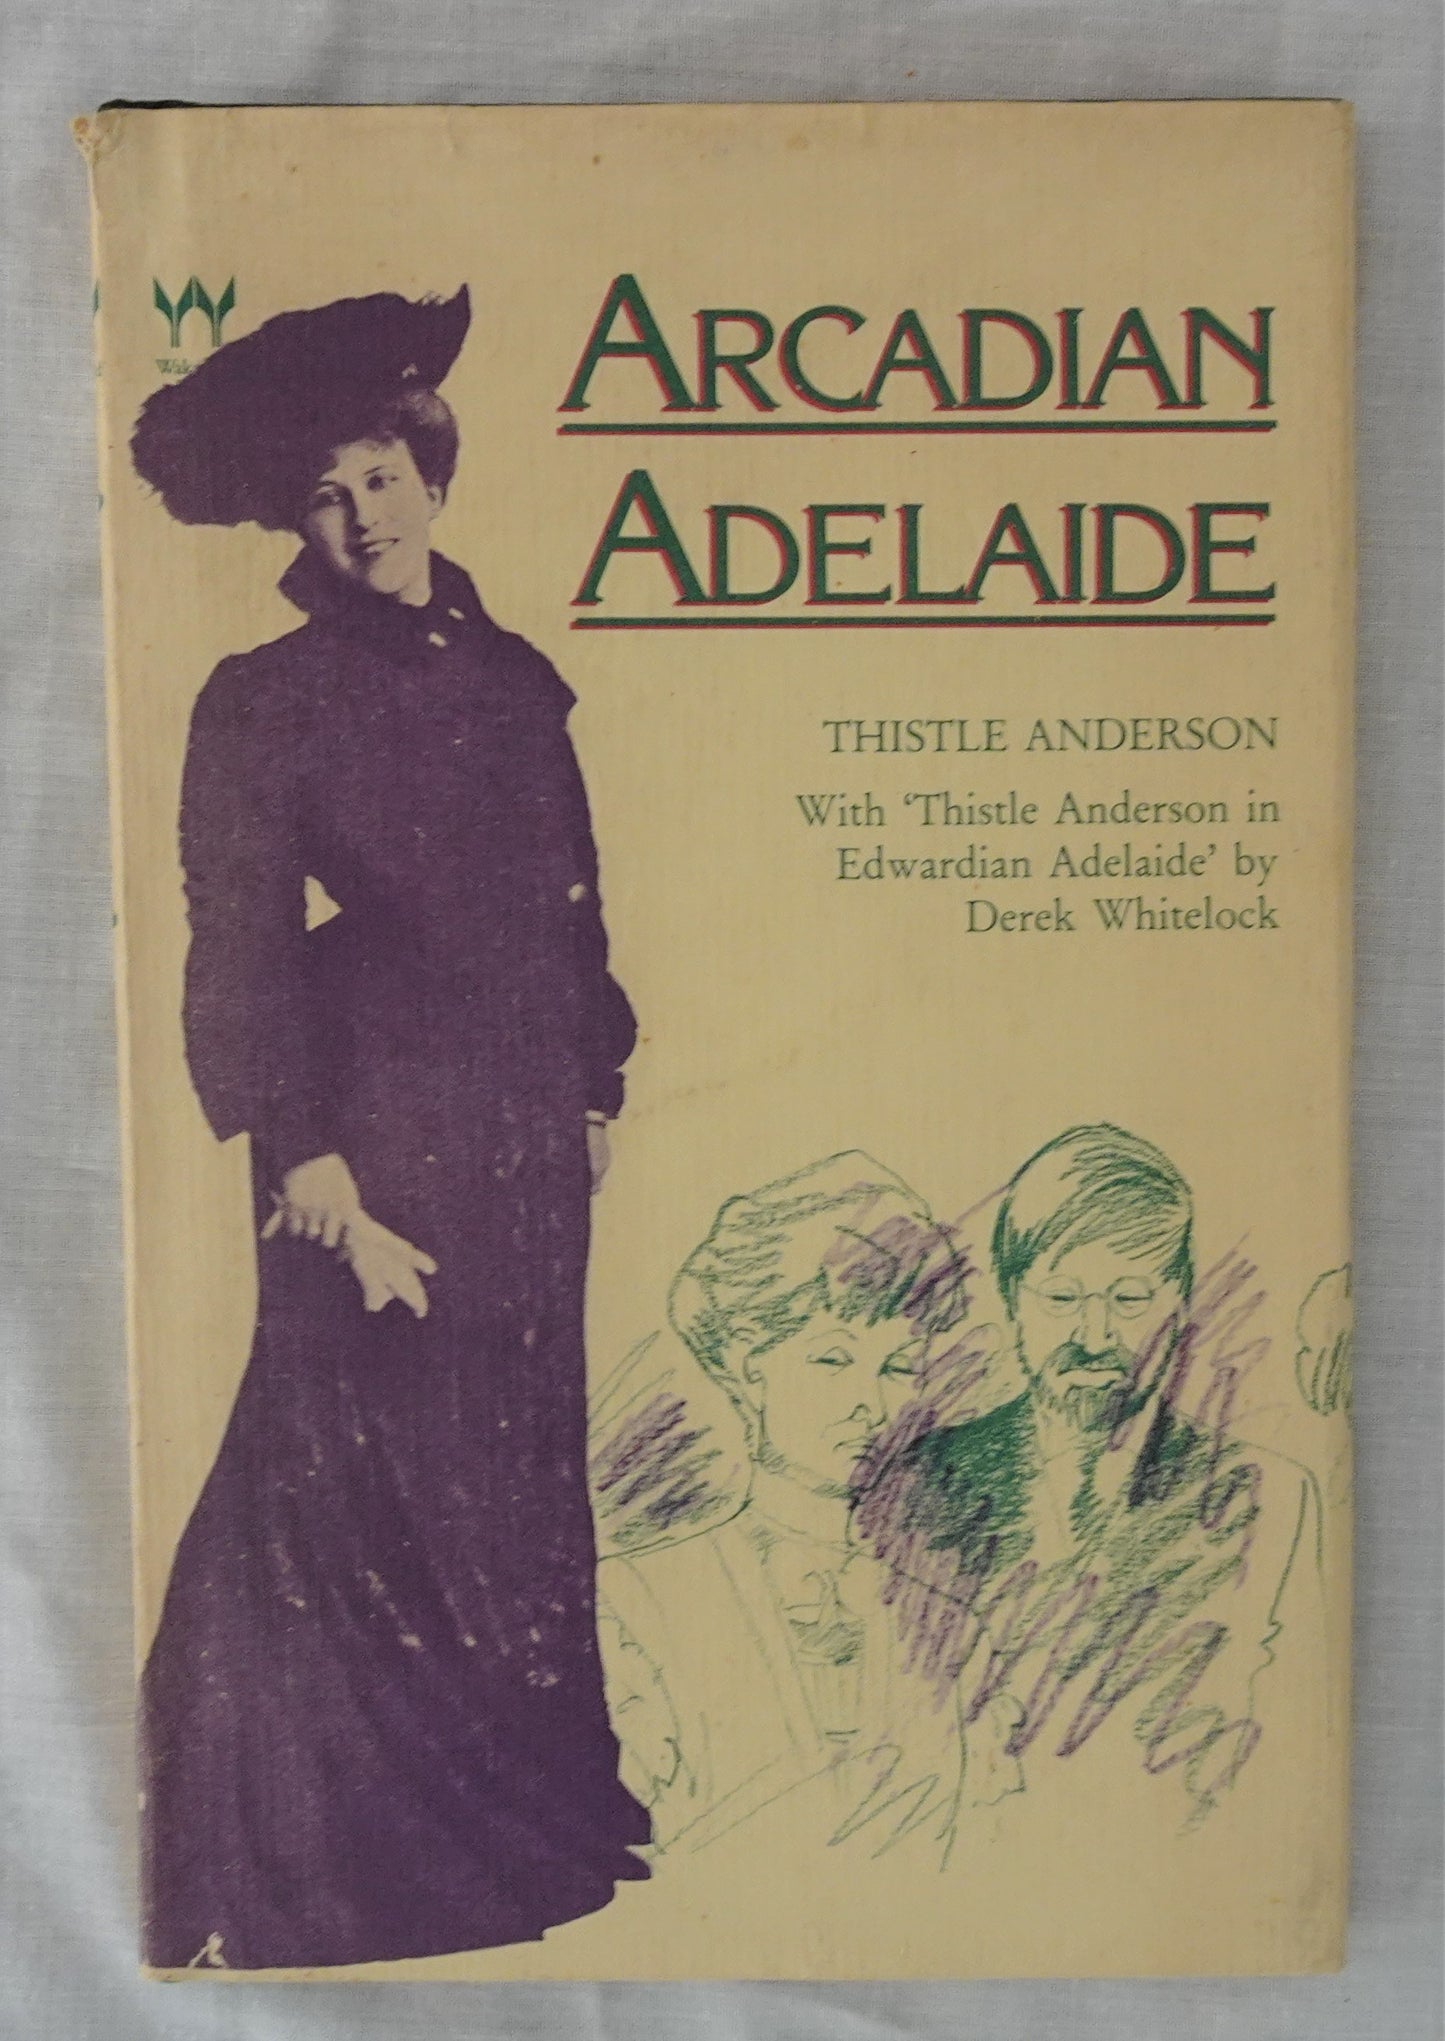 Arcadian Adelaide  by Thistle Anderson  with ‘Thistle Anderson in Edwardian Adelaide’ by Derek Whitelock